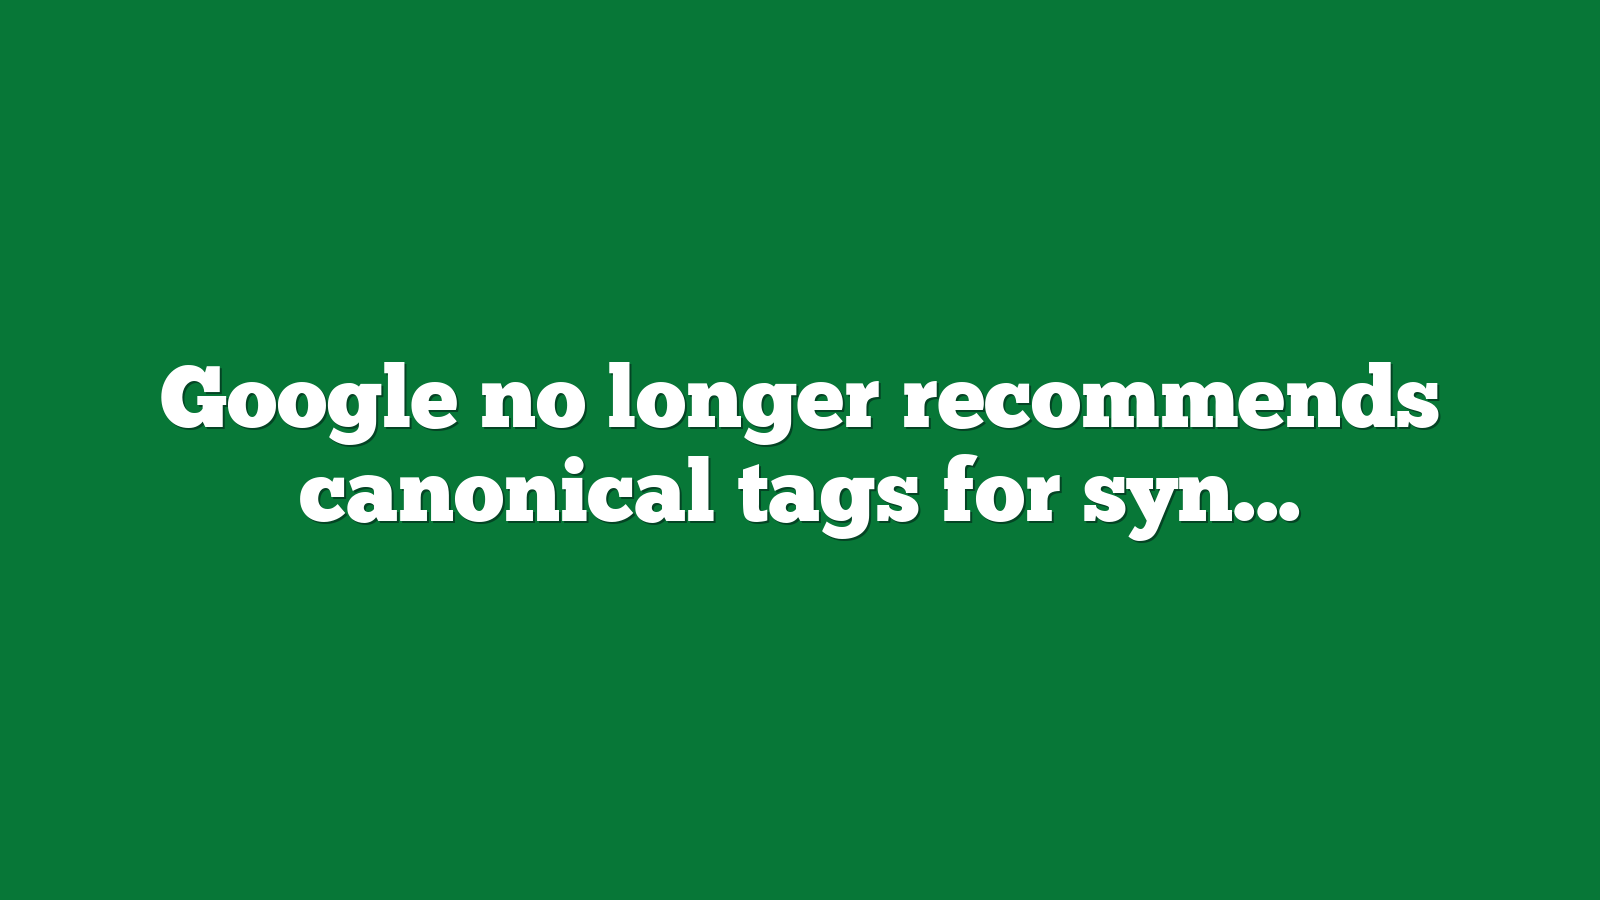 Google no longer recommends canonical tags for syndicated content